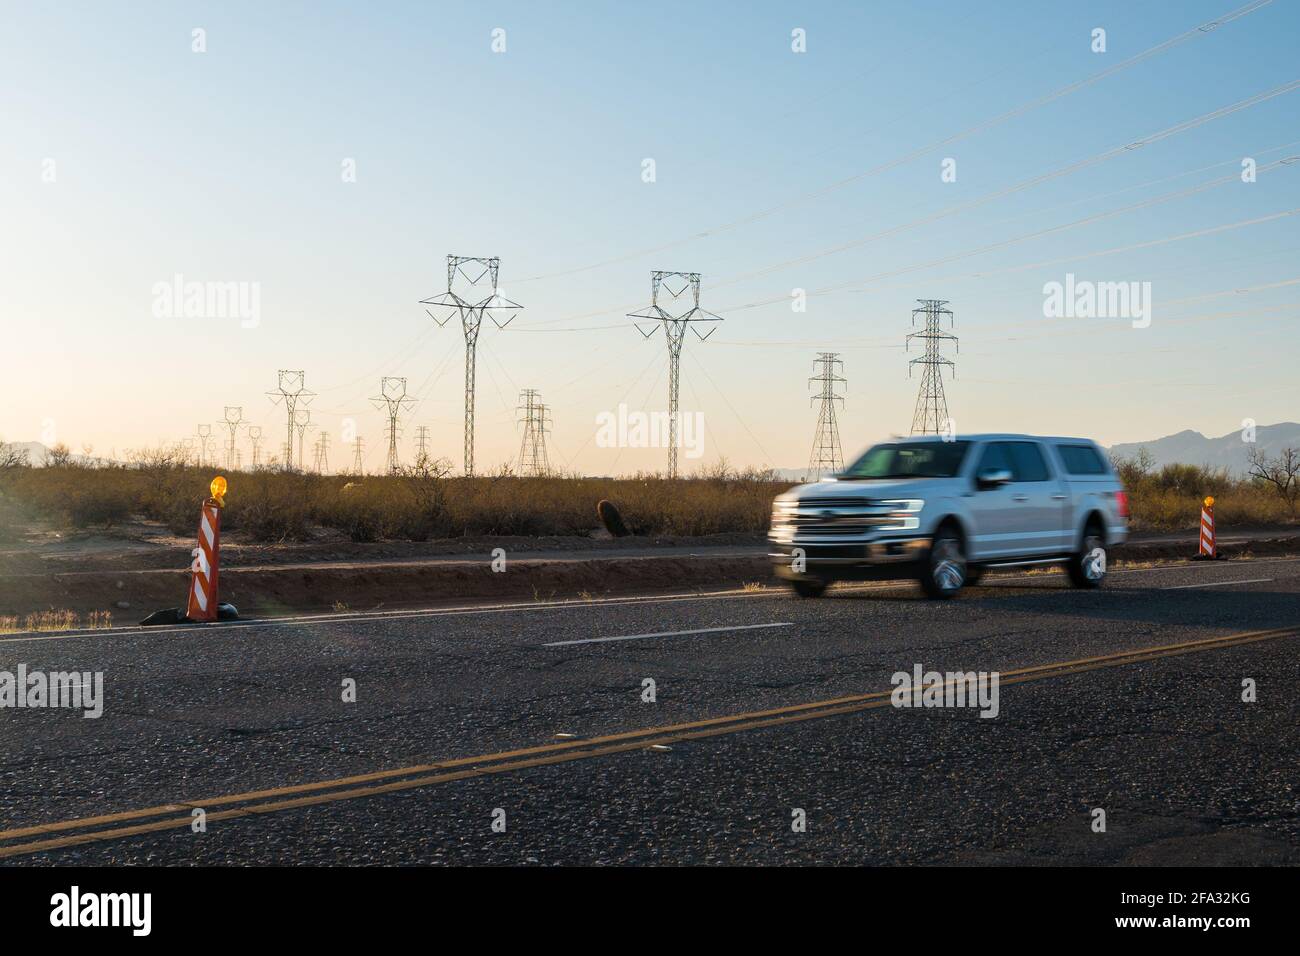 Electric pylons at sunset. Cars drive by on street.  Stock Photo